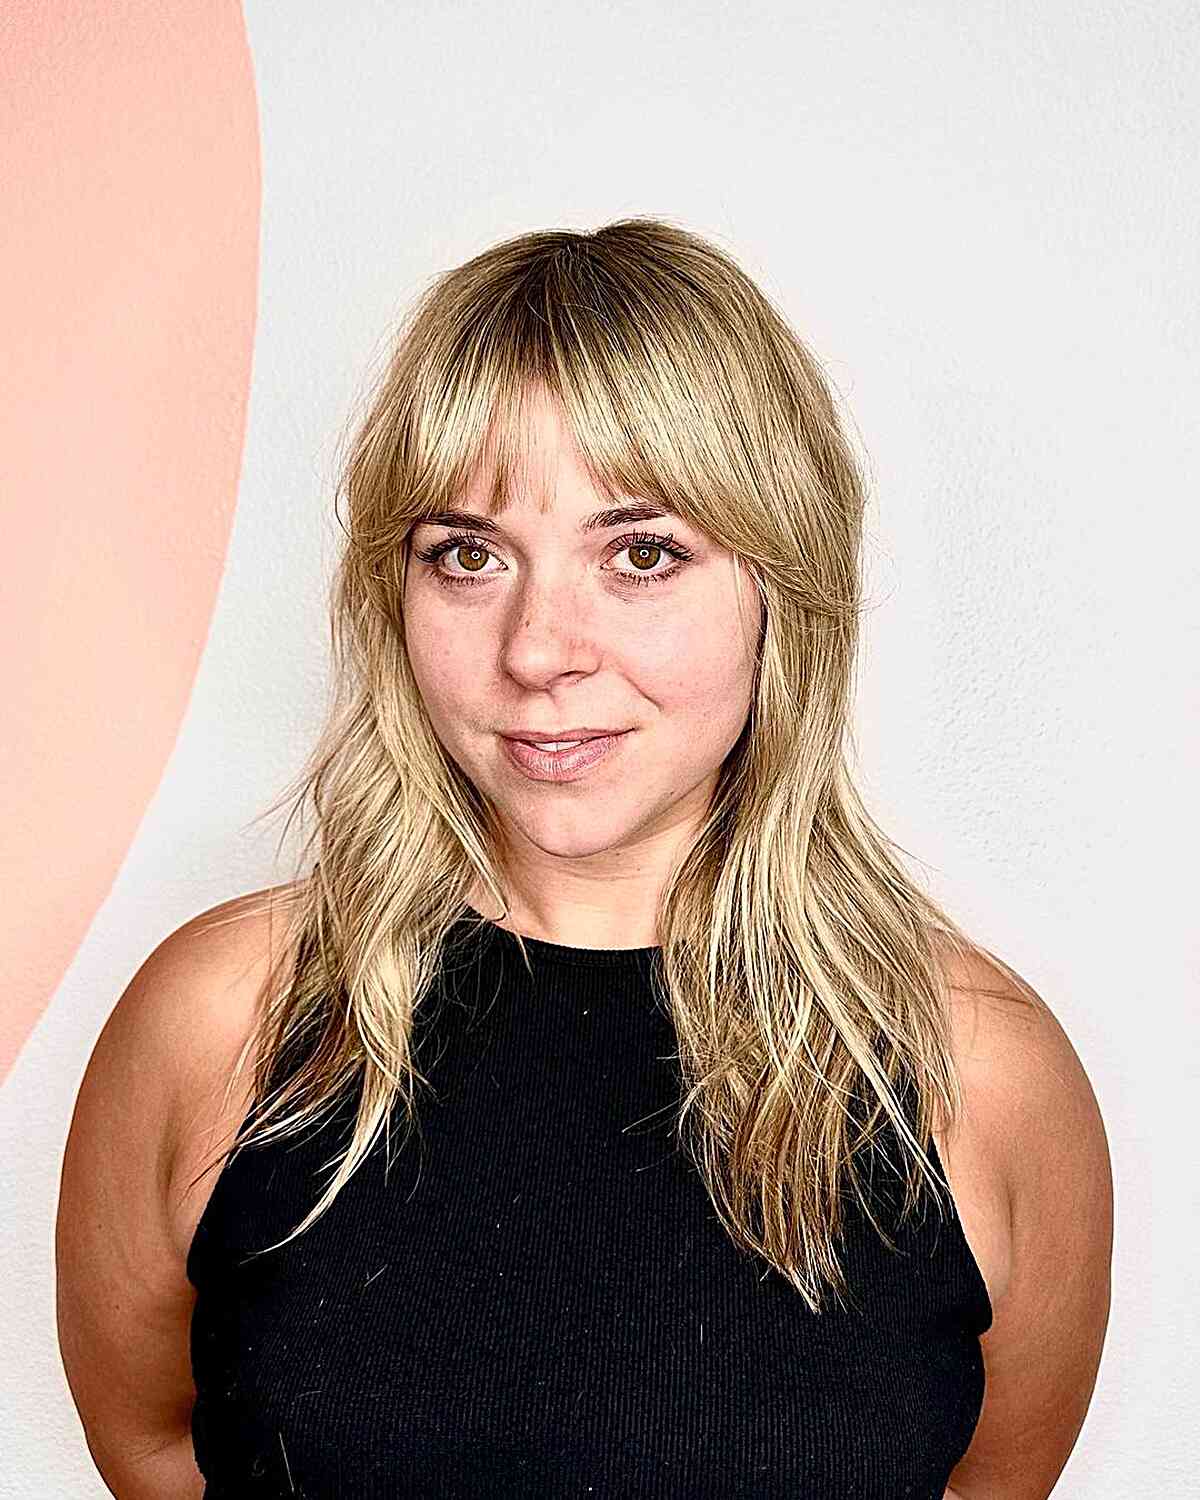 26 Coolest Ways to Get French Bangs If You Want to Try This New Hair Trend